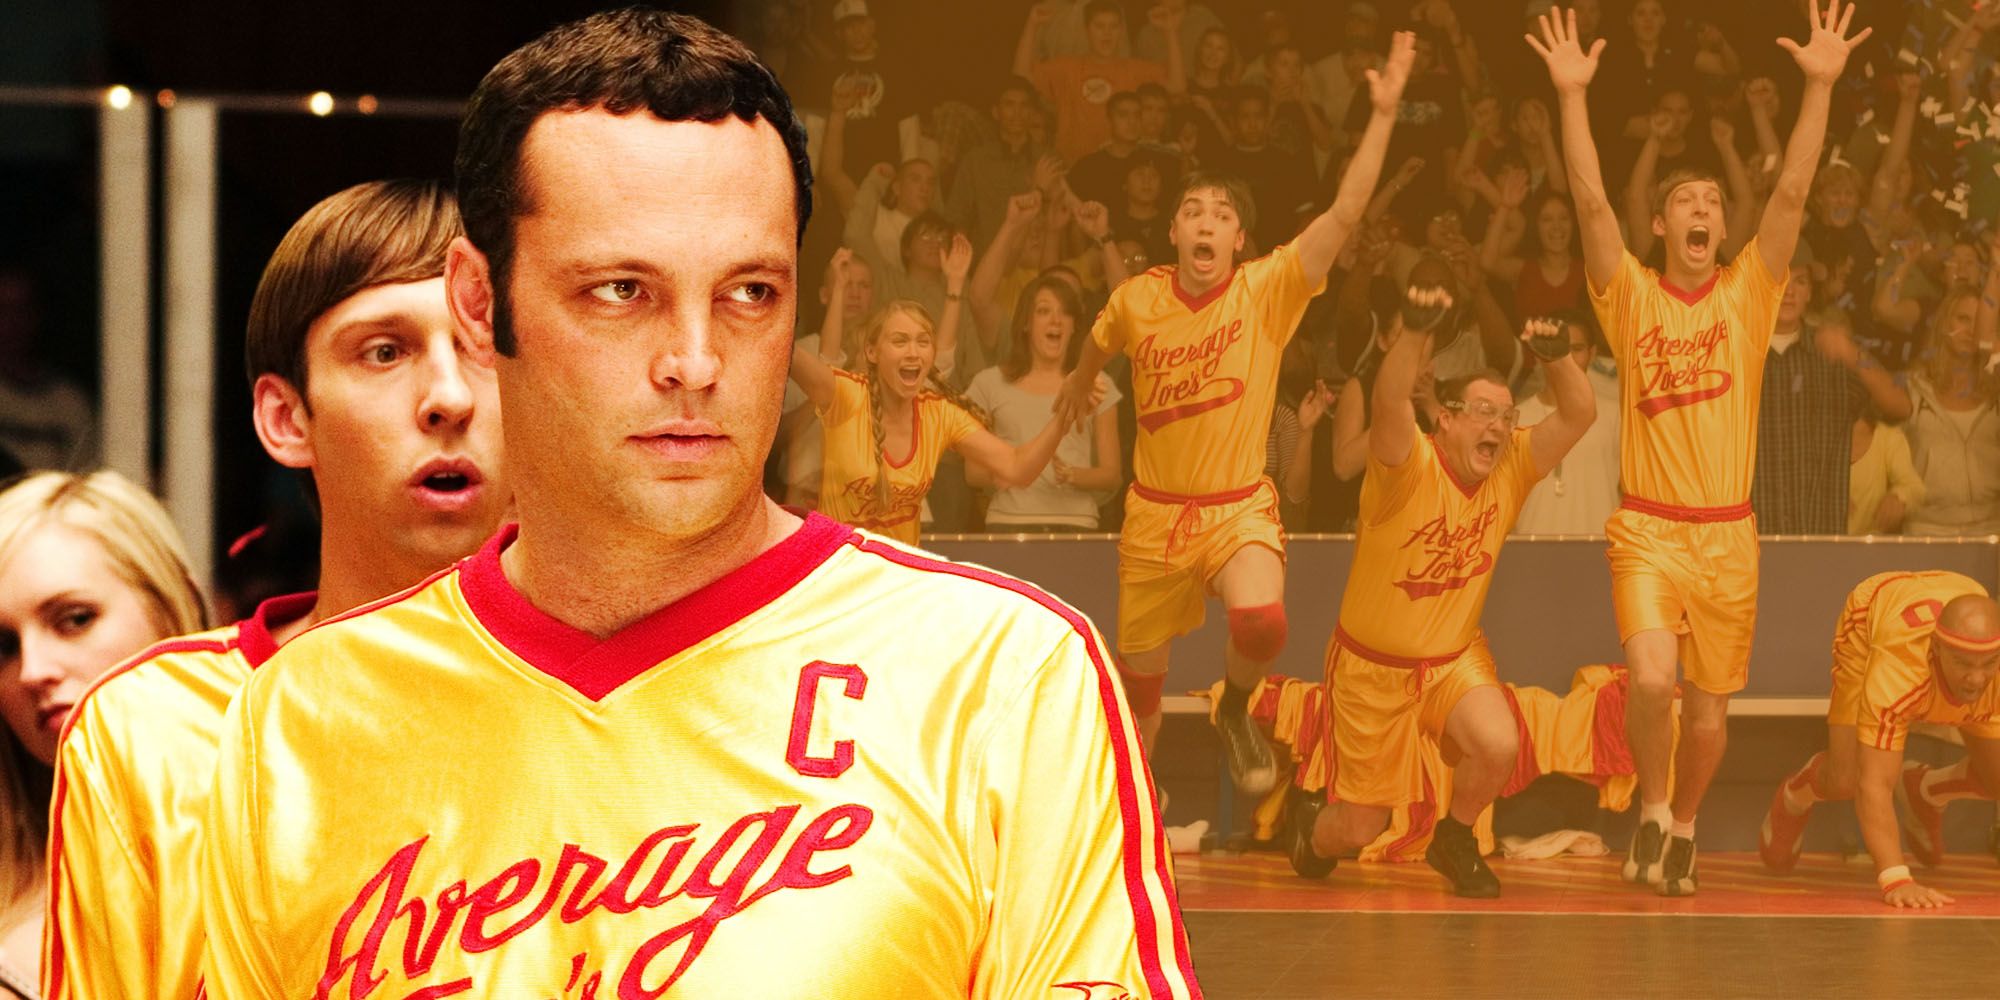 Vince Vaughn as Pete LaFleur from Dodgeball next to teammates celebrating